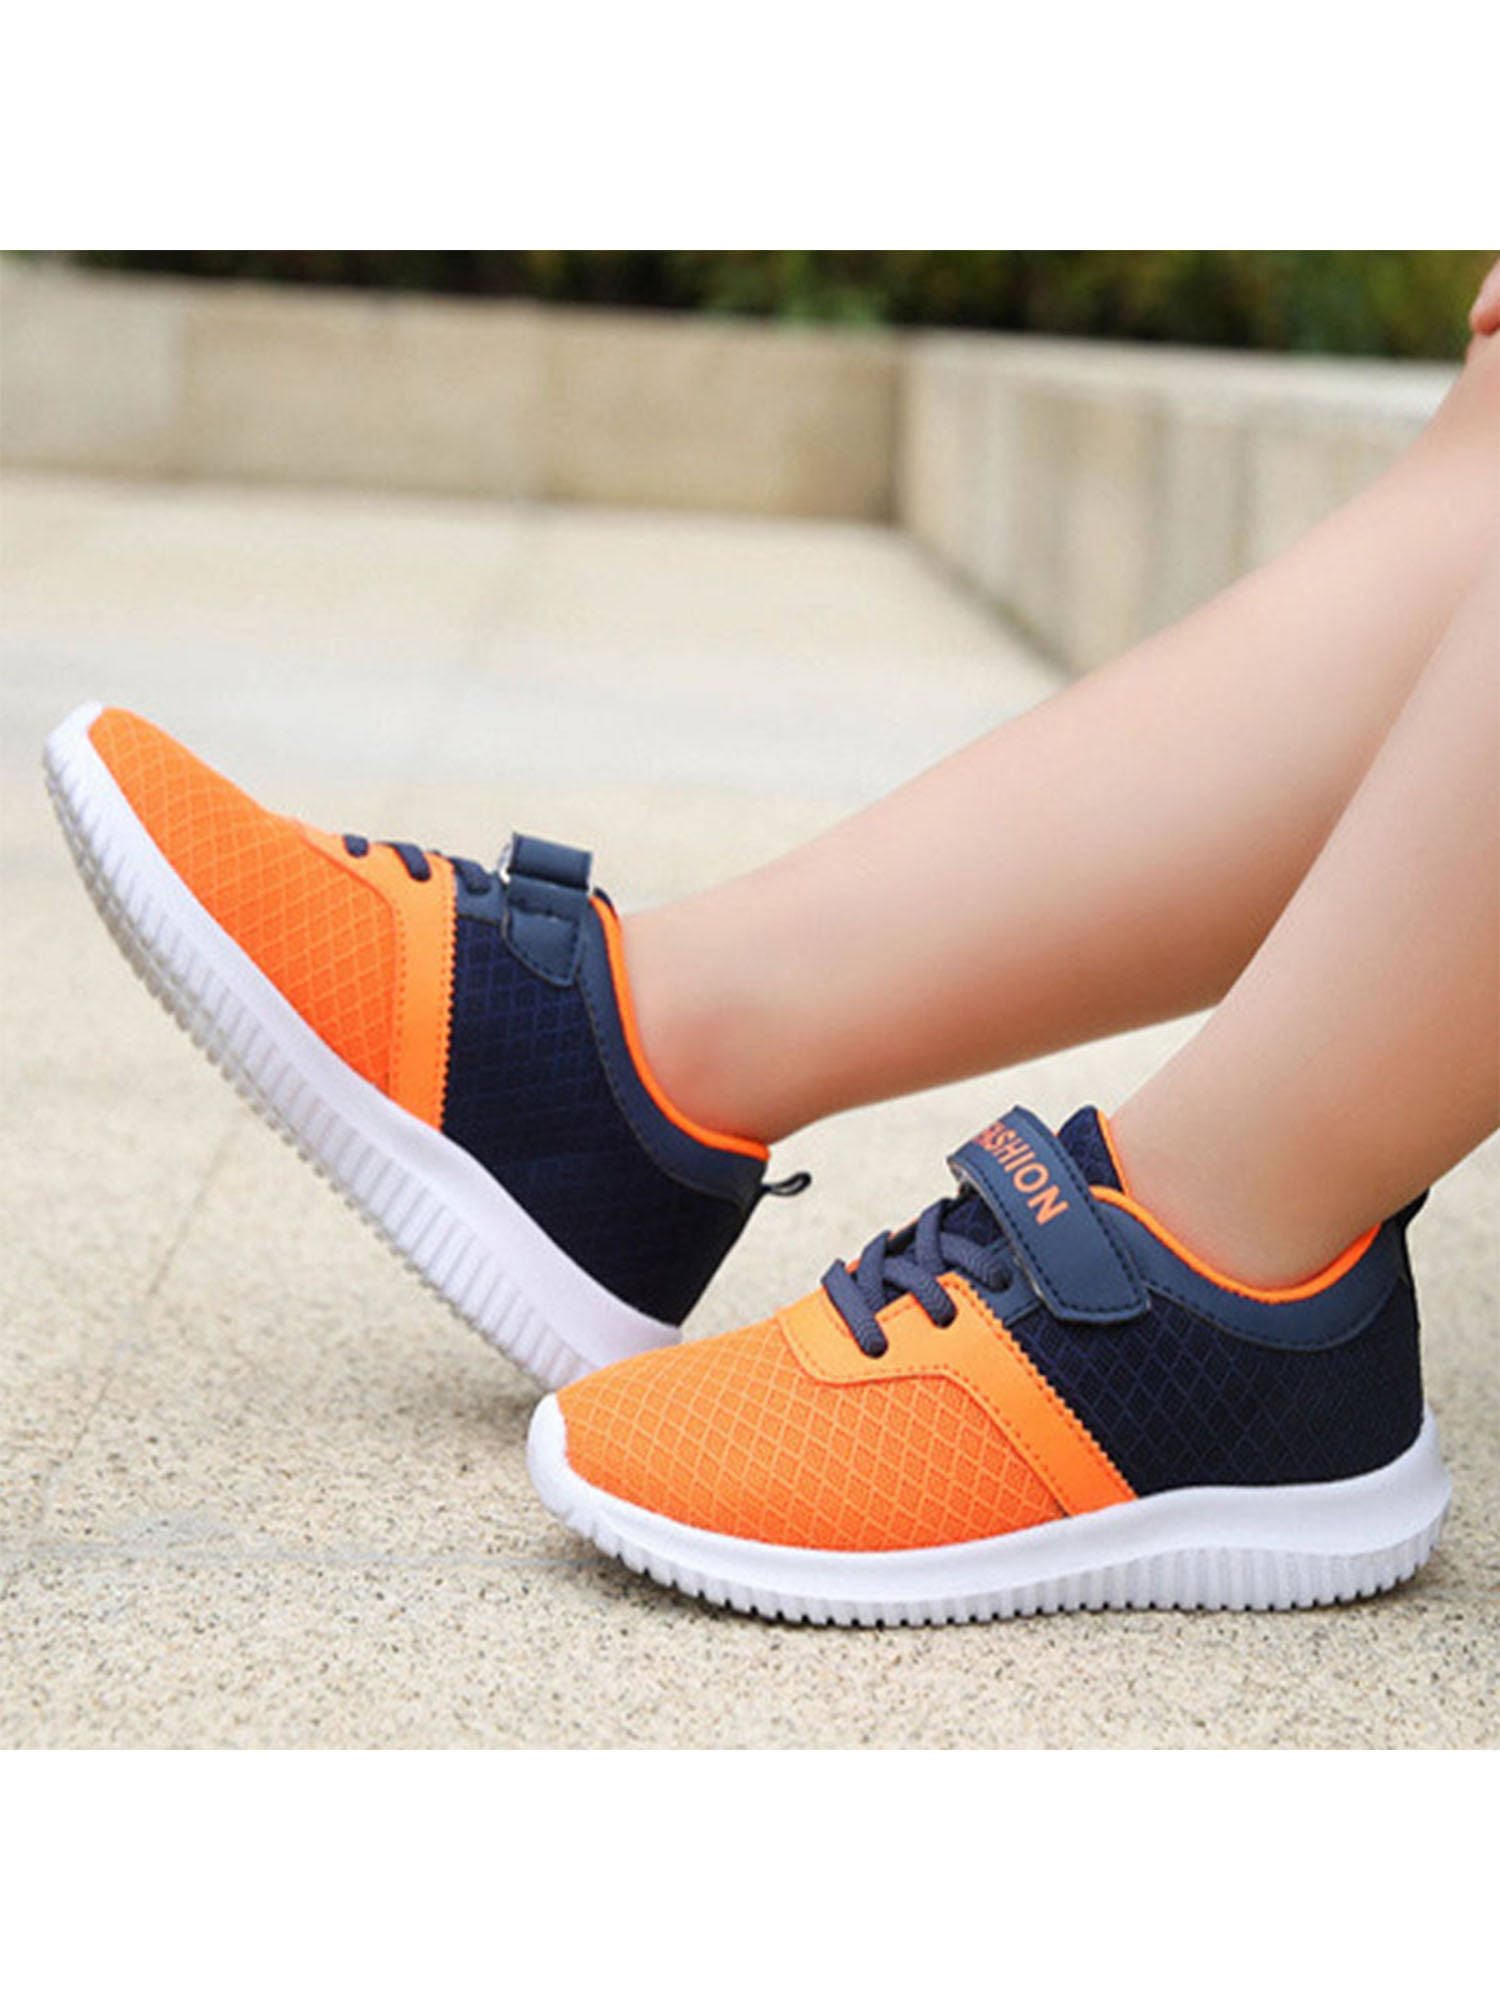 Details about   Girls Size 5.5 Breathable Running Shoes Lace Up Athletic Comfort Sneakers